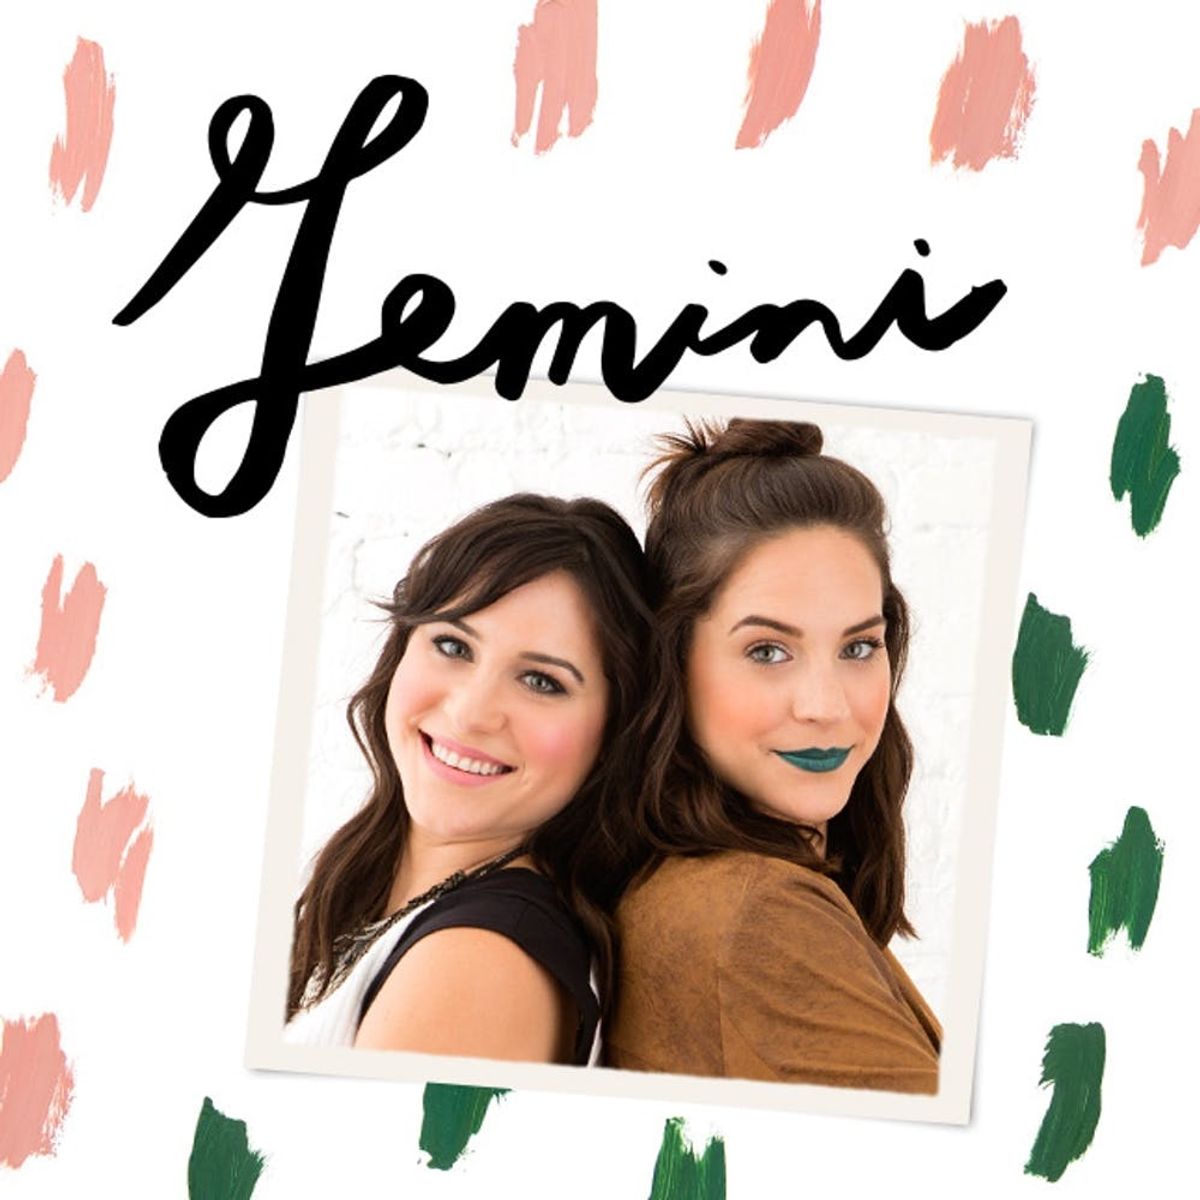 The Best Makeup for Your Zodiac Sign: Gemini Edition